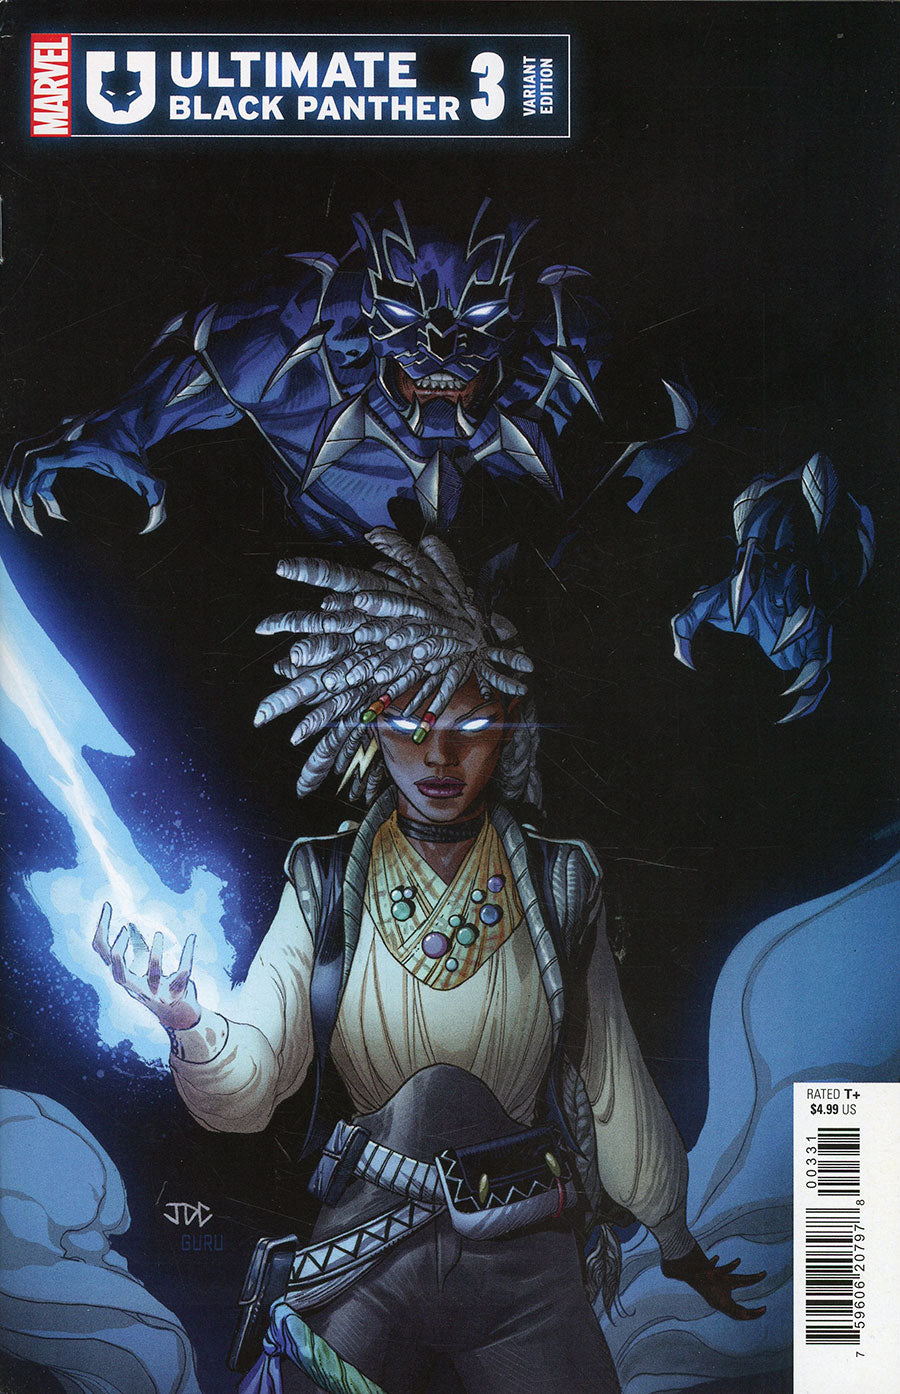 Ultimate Black Panther #3